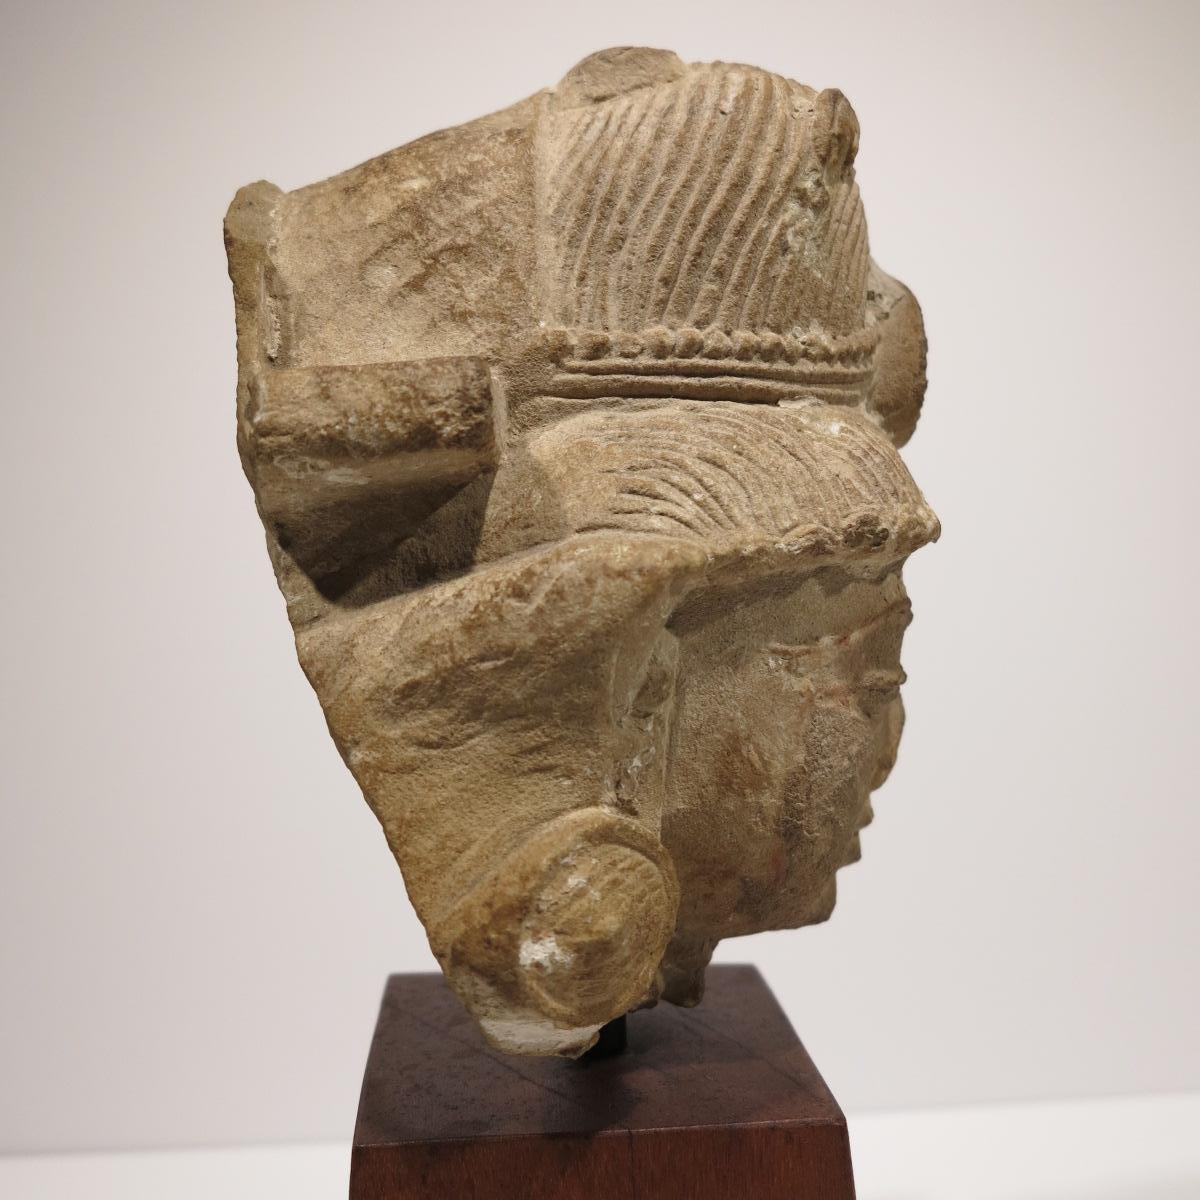 Beautiful 10th century bust of an Indian Deity. Buff sandstone, measures 8.25 x 5.25 x 6 inches. Measures 14.75 inches tall on wood base. 

Provenance: Ken Shores collection. 